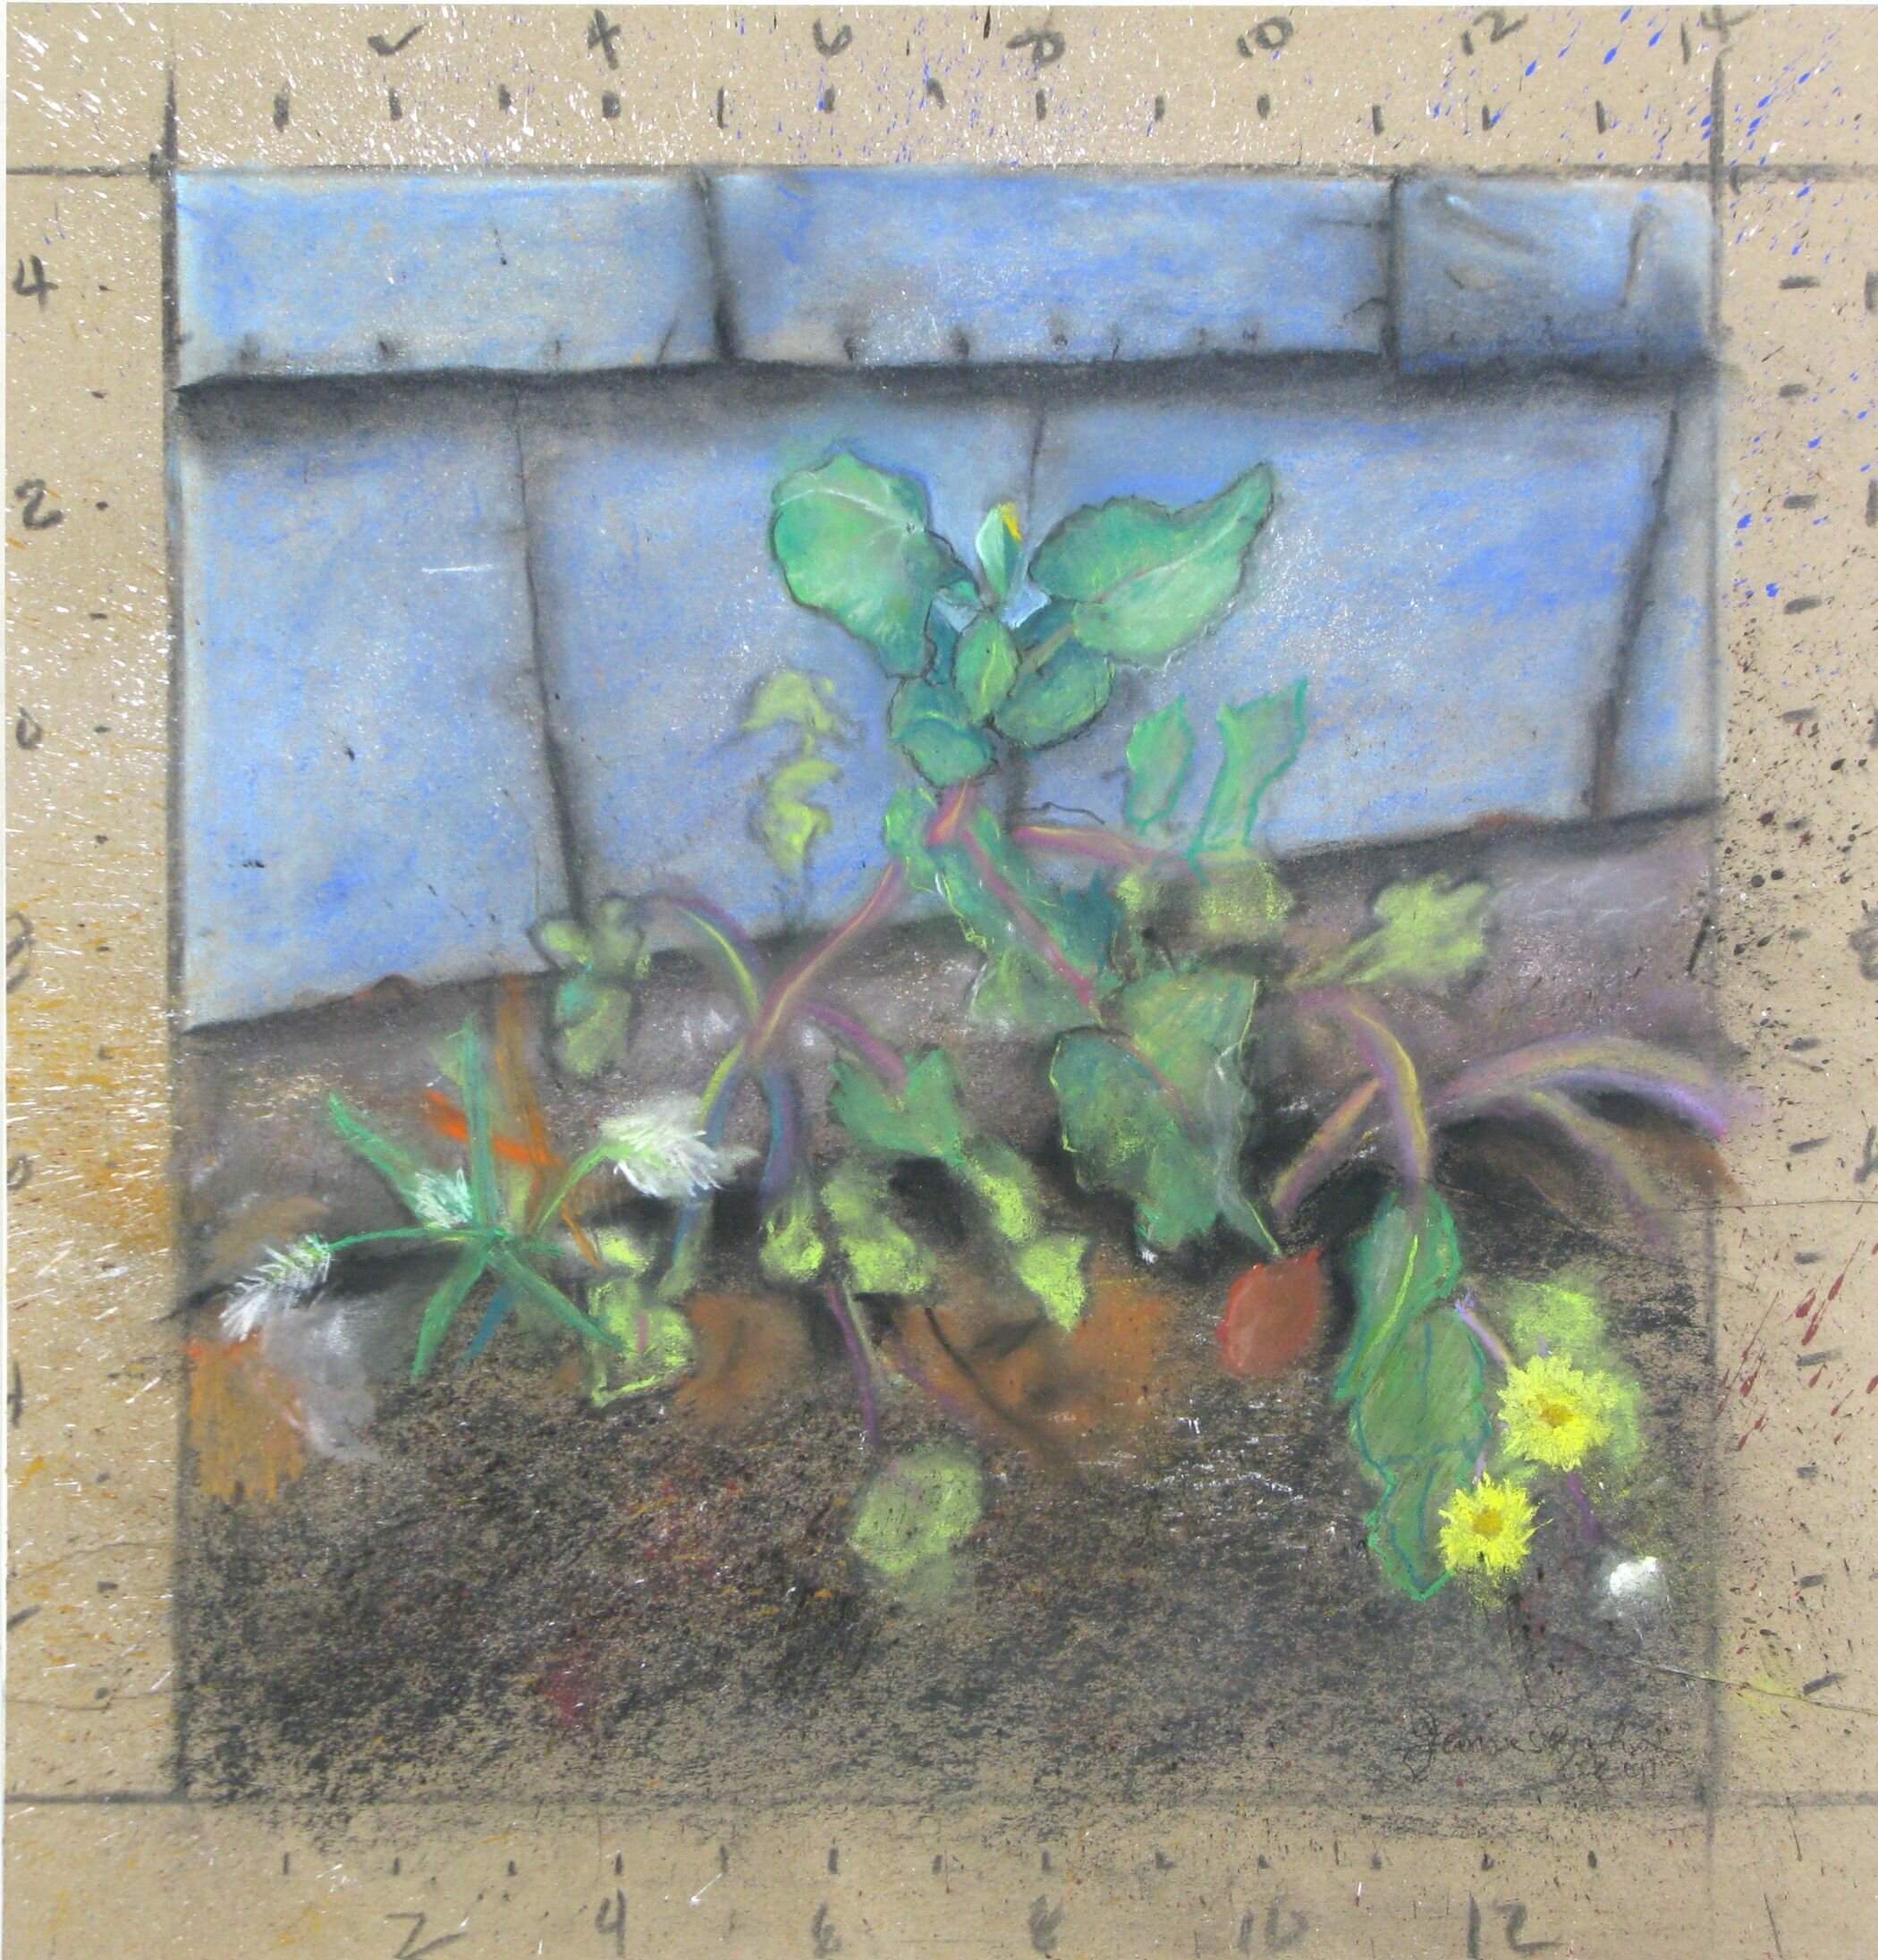   Thrive Where You're Planted  pastel, gouache on paper, 18.5 x 17.5 inches 